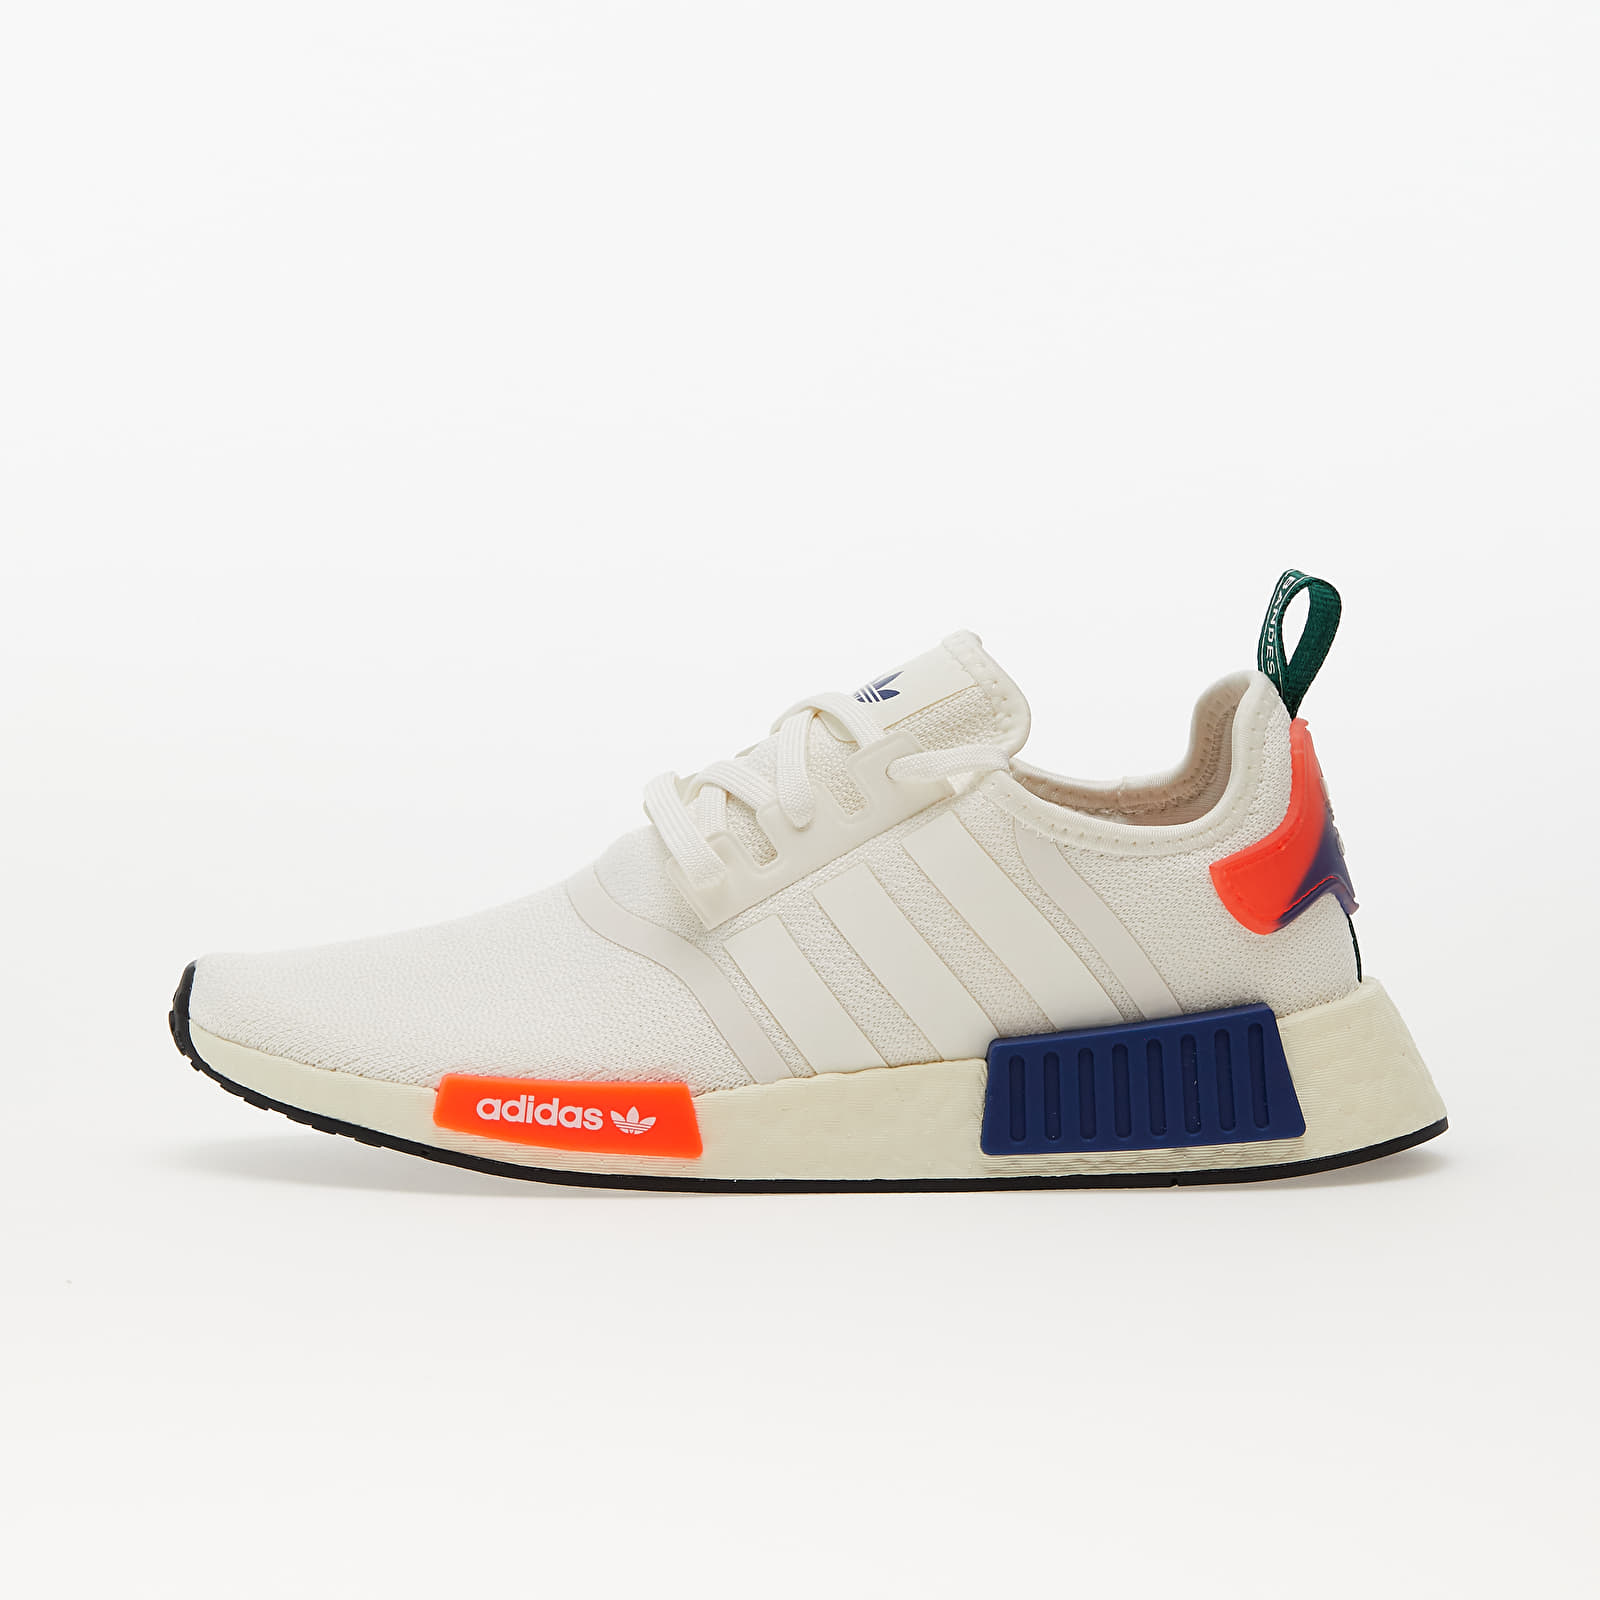 Men's shoes adidas NMD_R1 Cloud White/ Off White/ Solid Red